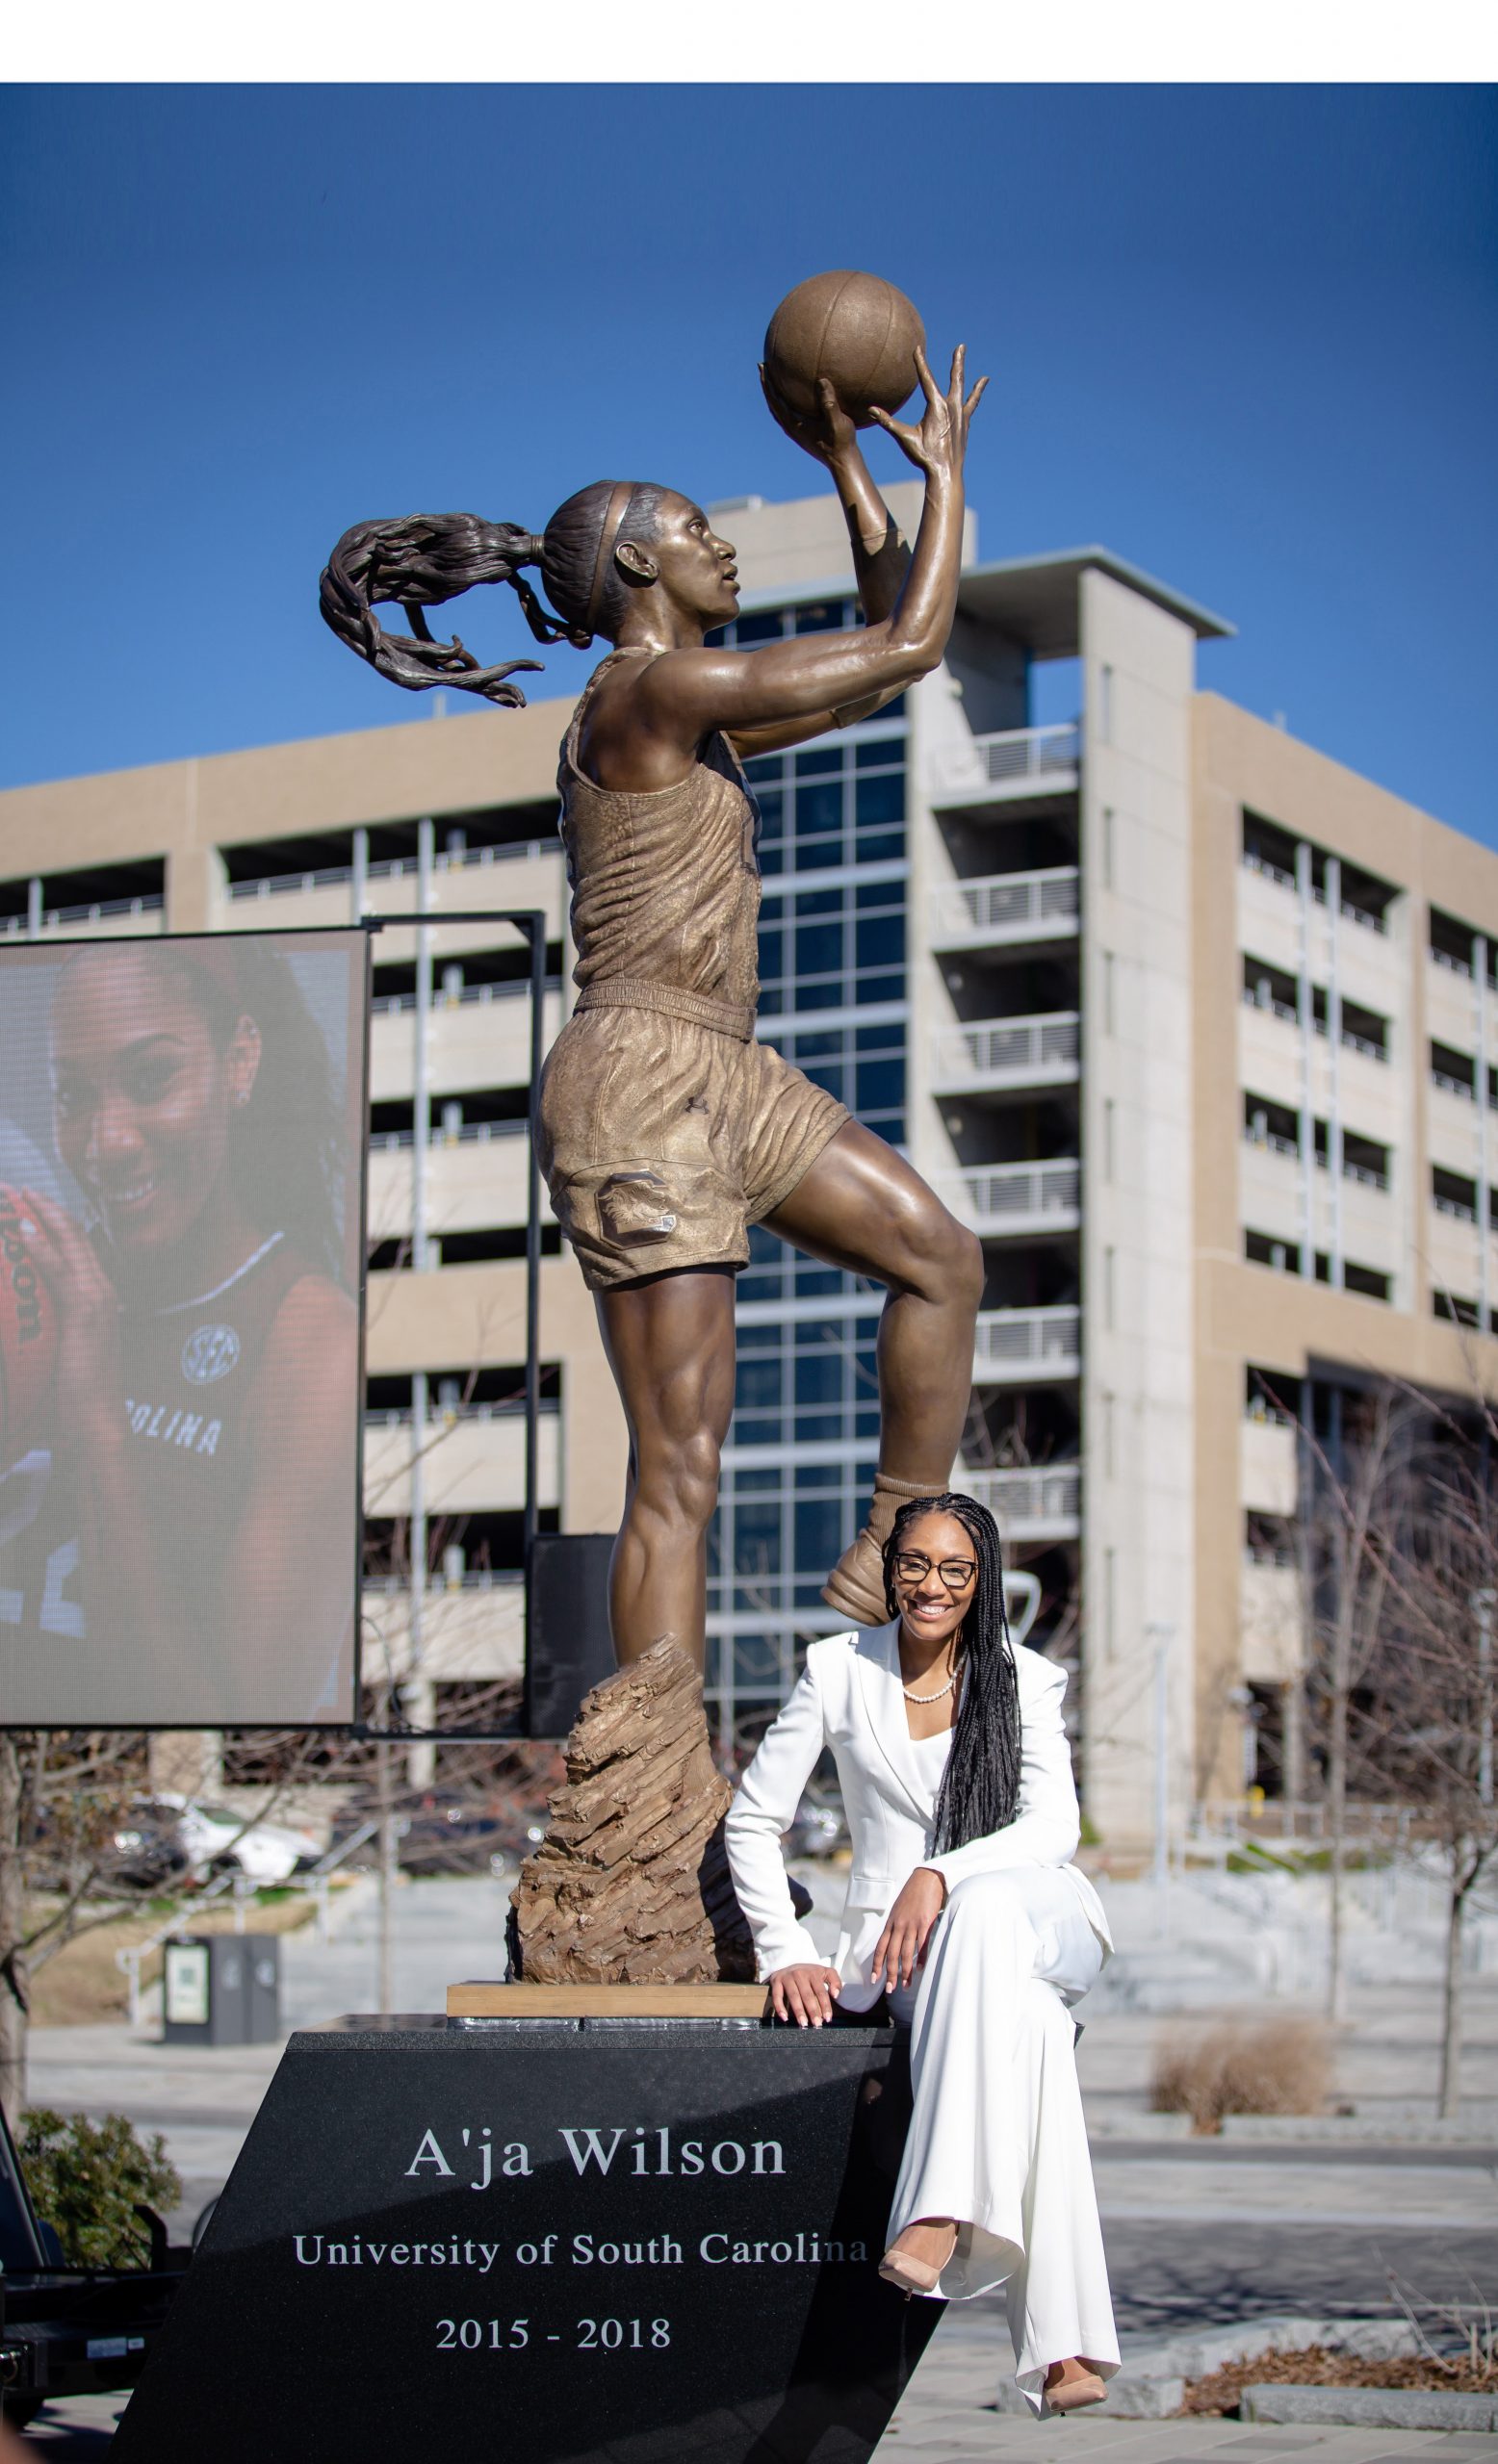  Columbian A’ja Wilson had a record-obliterating career at the University of South Carolina, leading the Gamecocks under Coach Dawn Staley to a national title in 2017 and emerging as the WNBA’s top draft pick in 2018. Her statue was unveiled Jan. 18, 2021 and is the first statue of a woman on USC’s campus, only one of three representing an individual. 